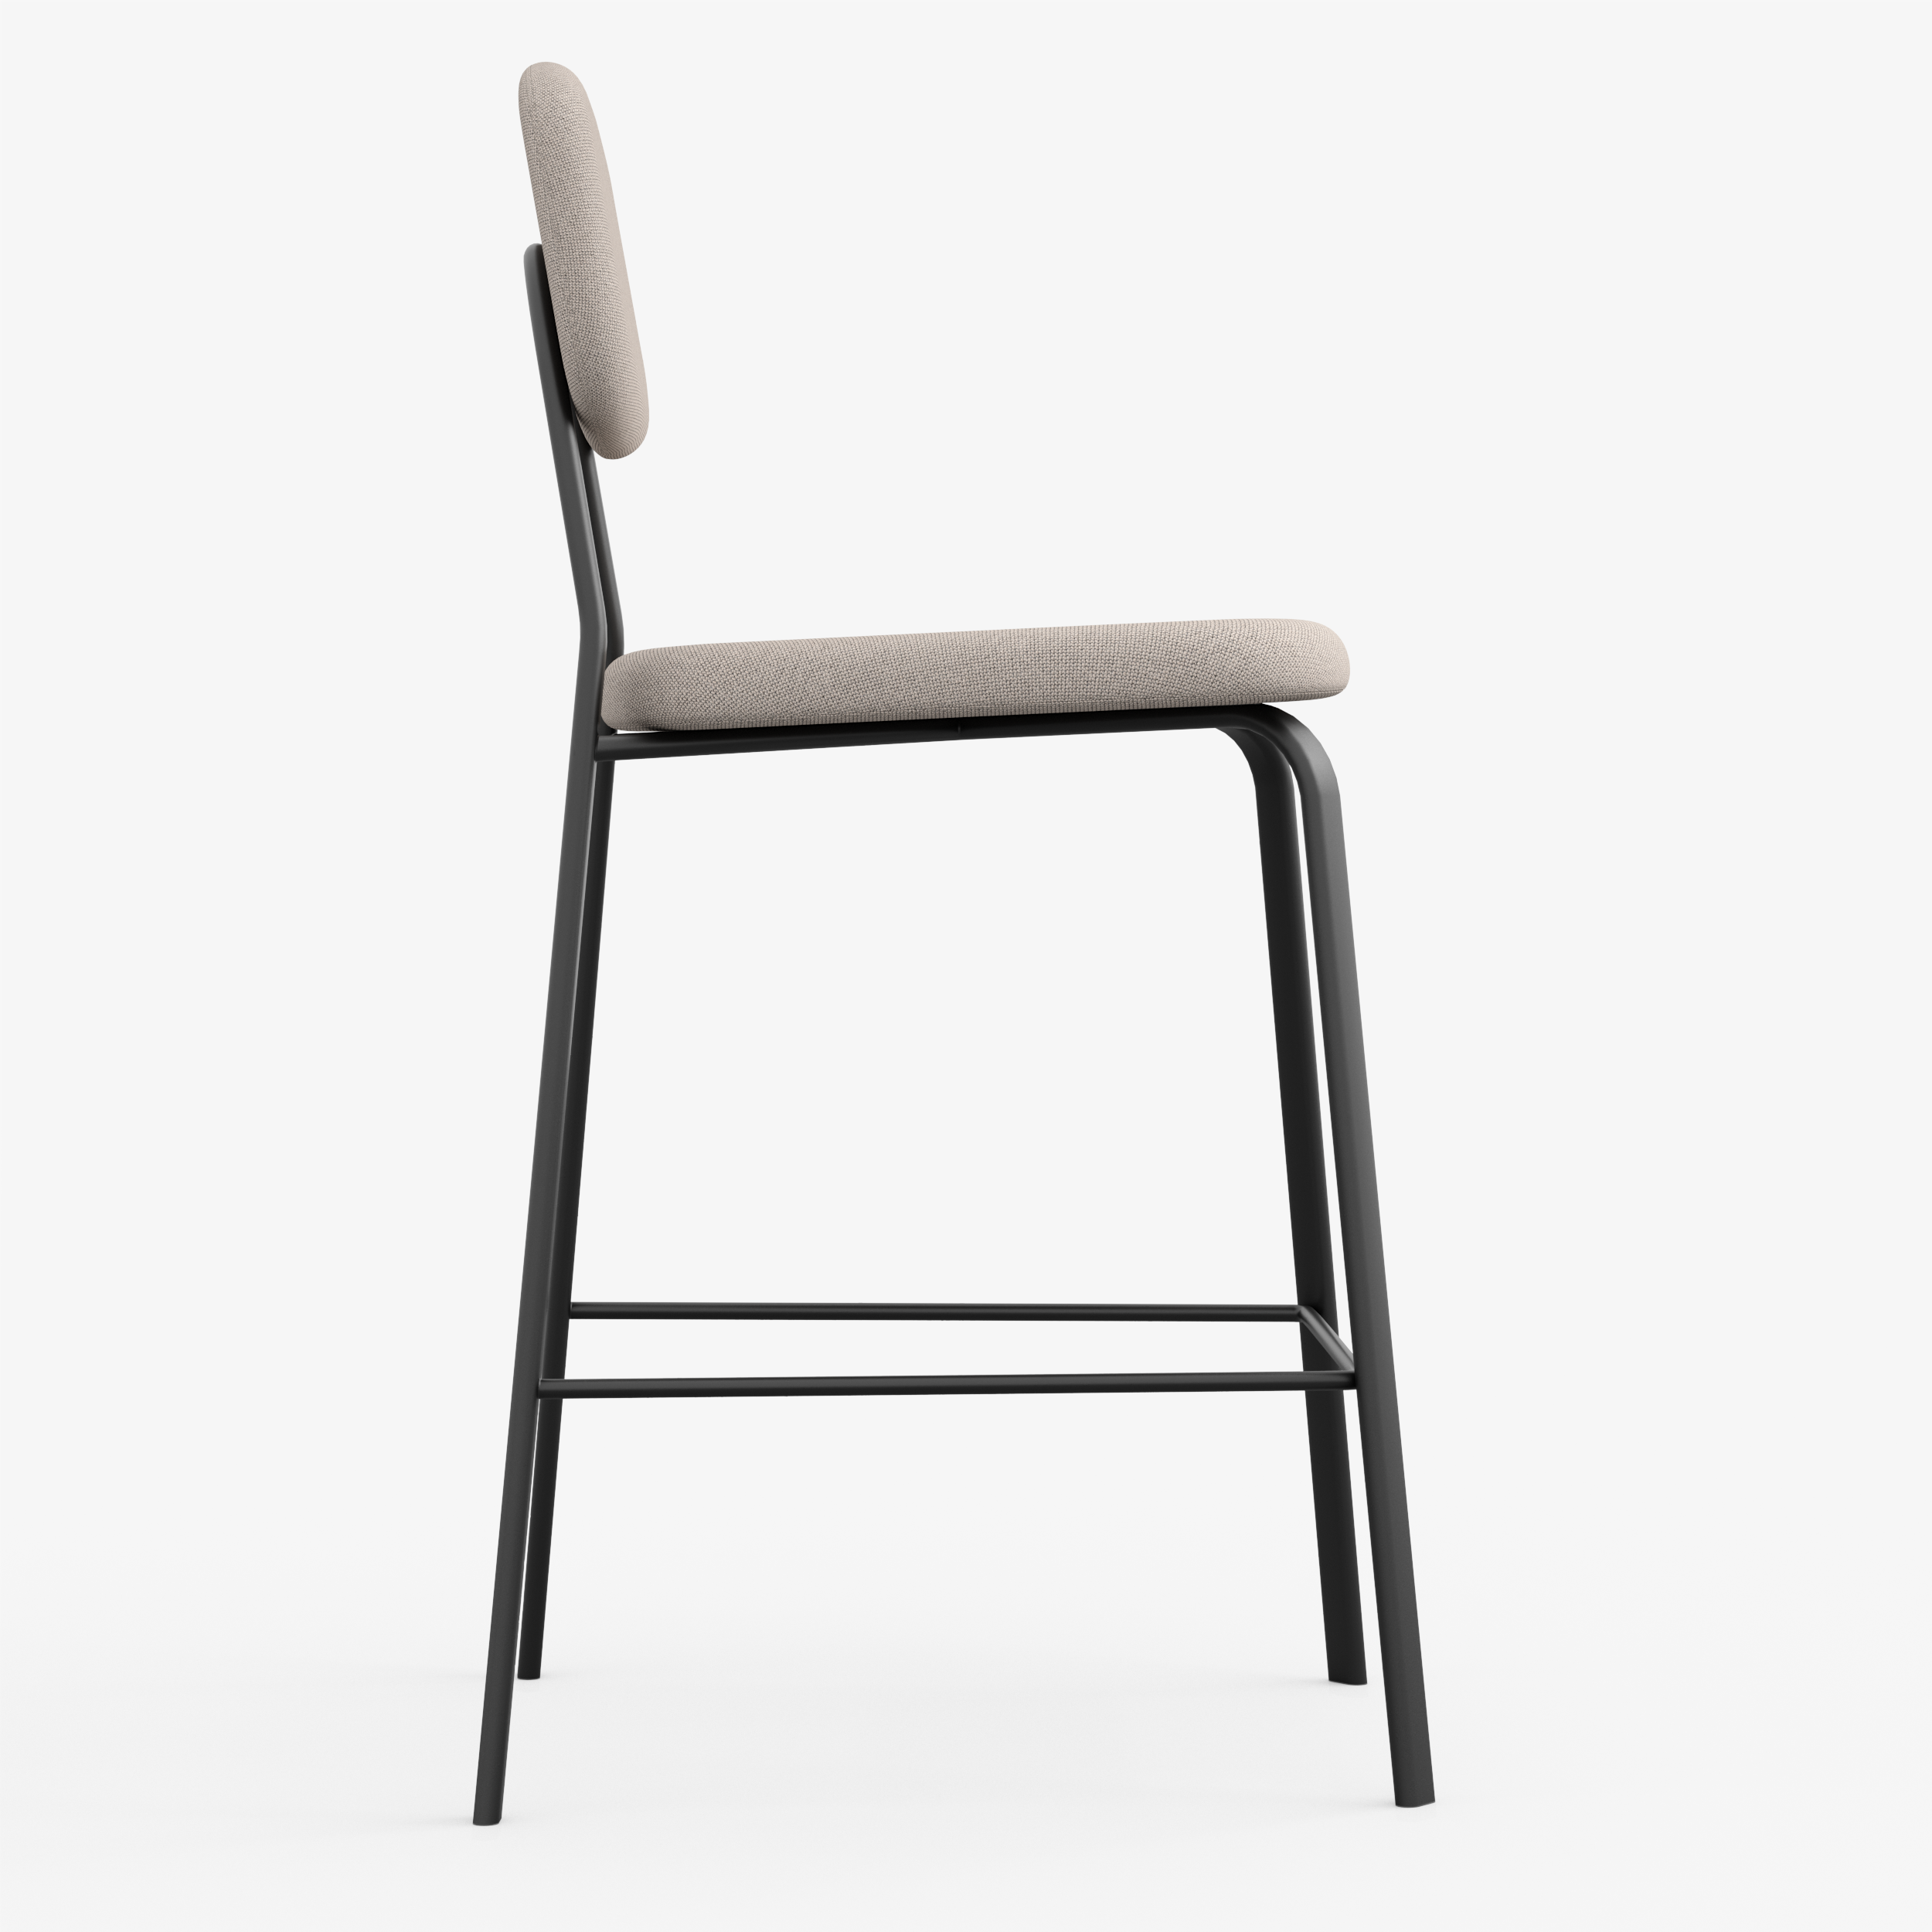 Form - Chair / High (Rectangle, Beige)